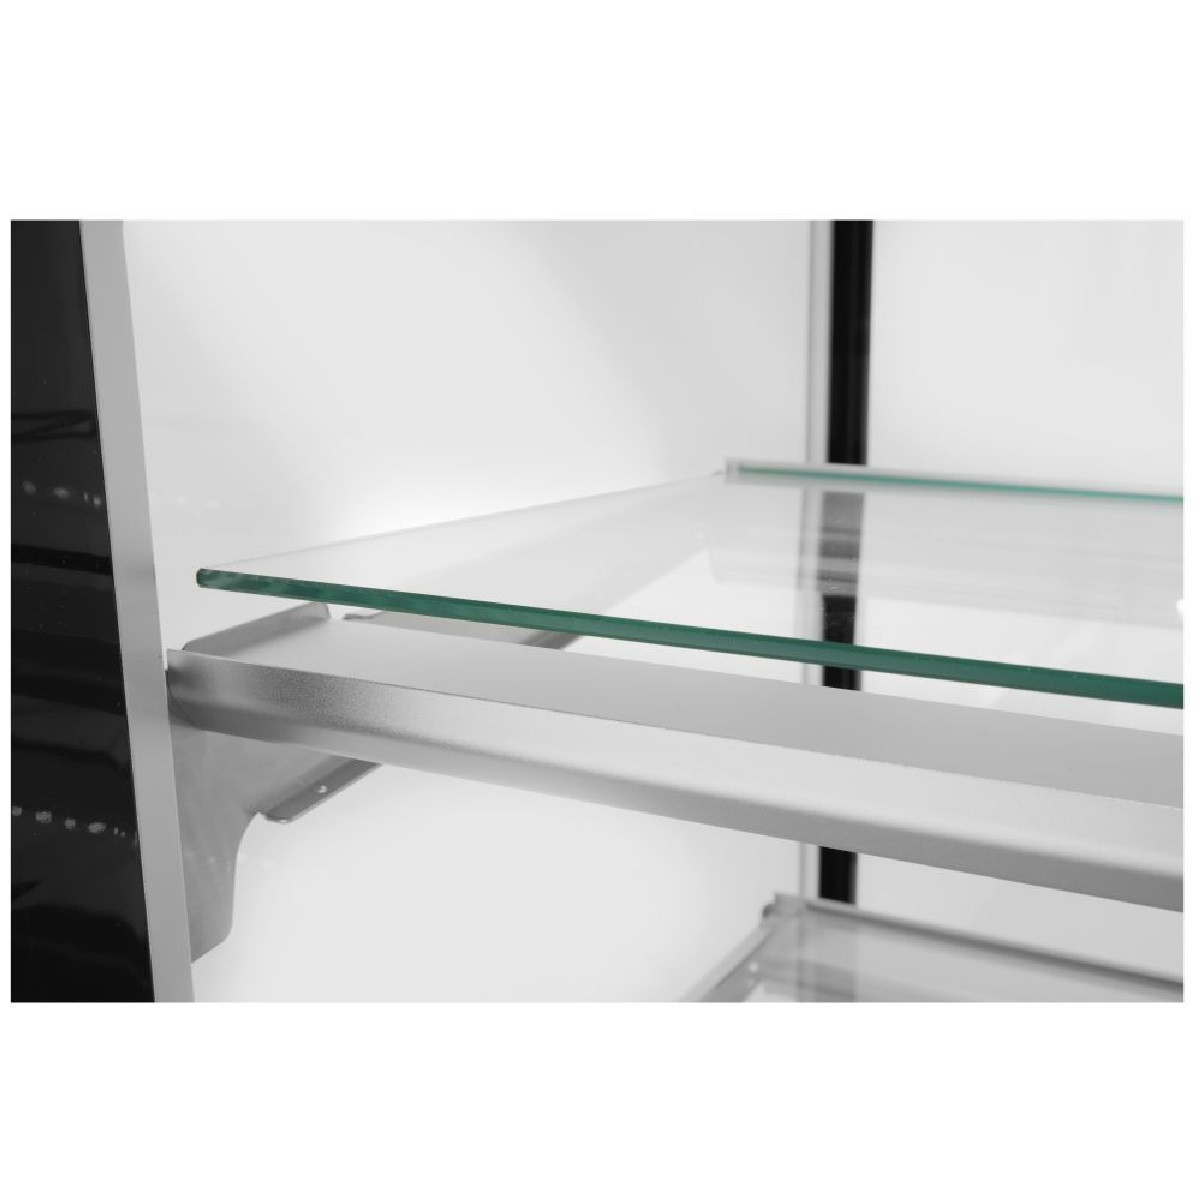 Hendi Arktic display case with 2 shelves 300 litres